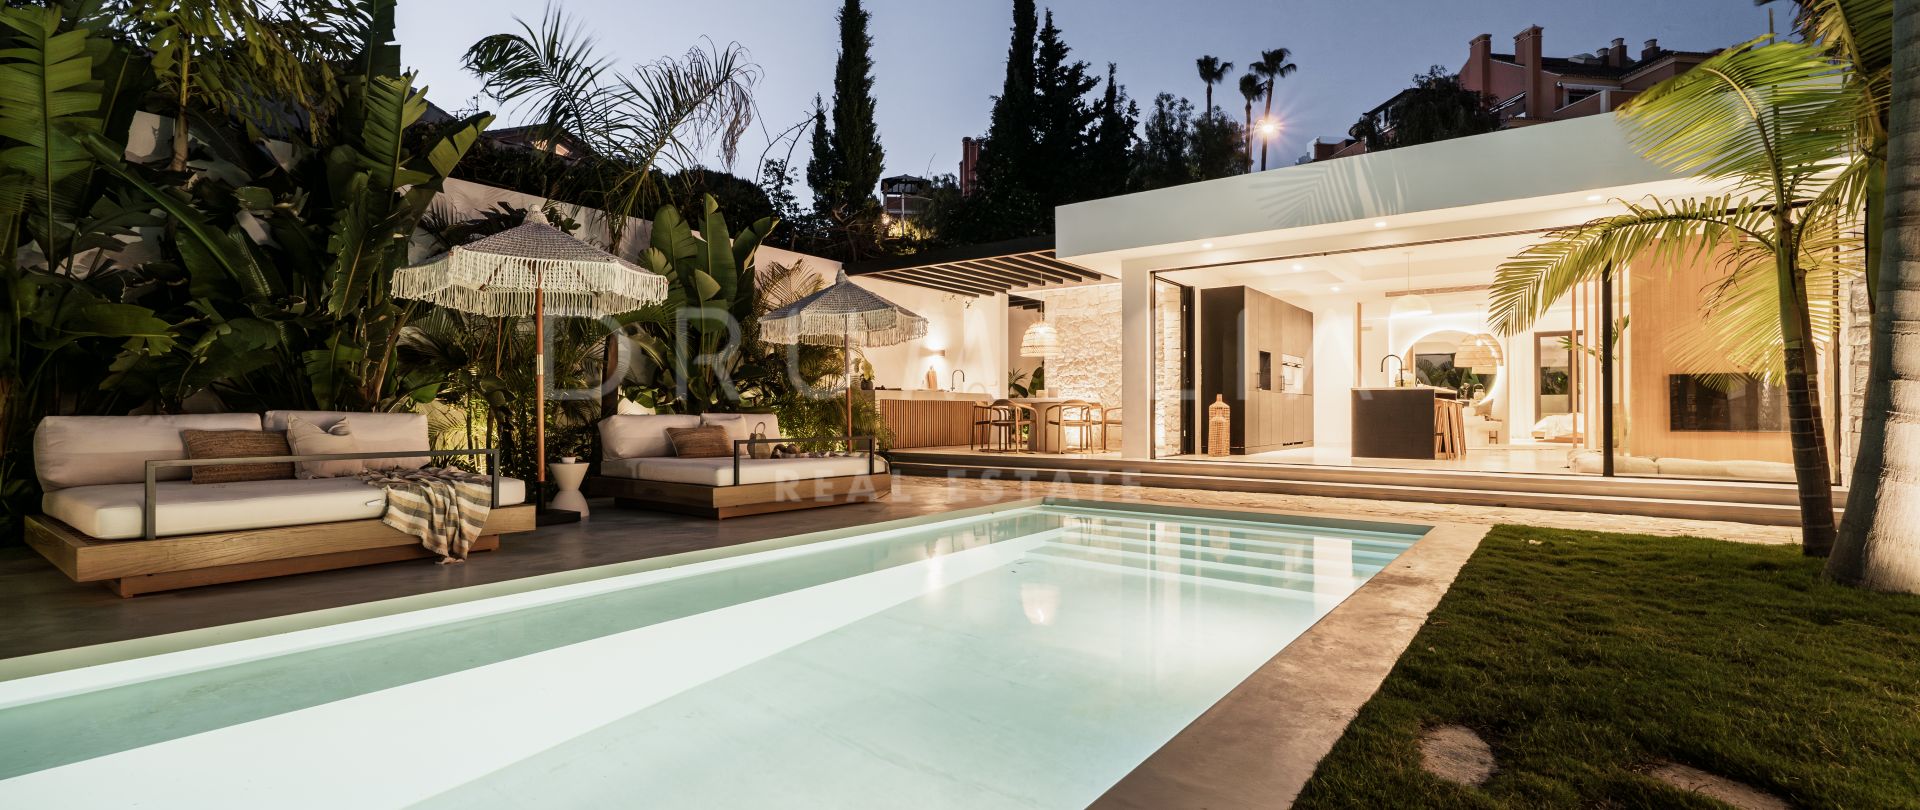 Stunning new Balinese-style villa in a prime location in Nueva Andalucia, Marbella